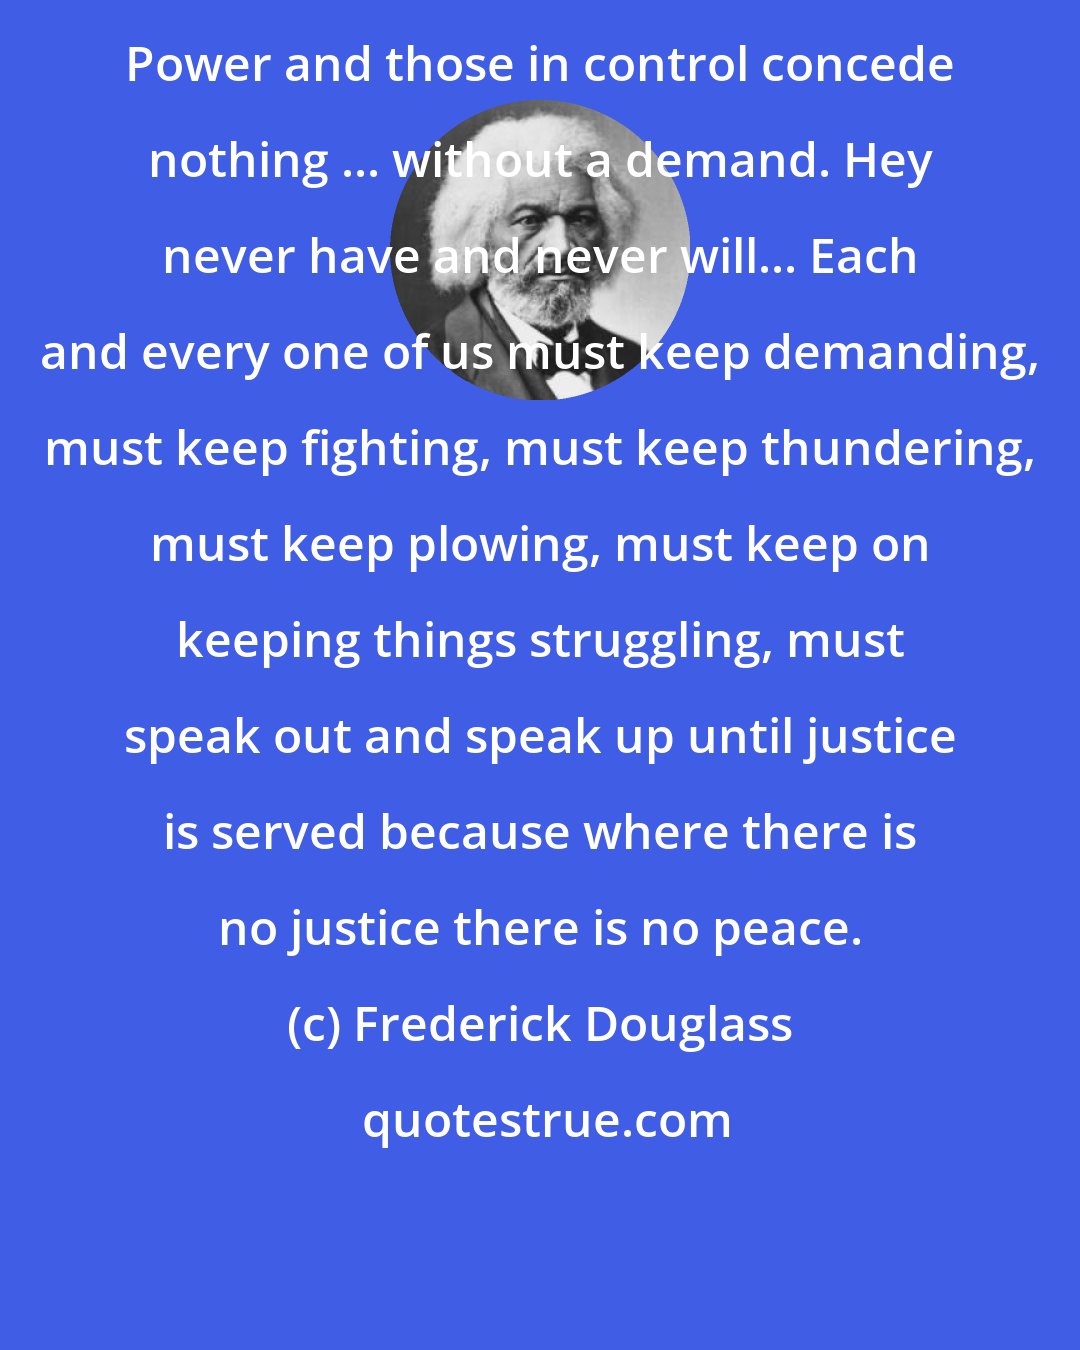 Frederick Douglass: Power and those in control concede nothing ... without a demand. Hey never have and never will... Each and every one of us must keep demanding, must keep fighting, must keep thundering, must keep plowing, must keep on keeping things struggling, must speak out and speak up until justice is served because where there is no justice there is no peace.